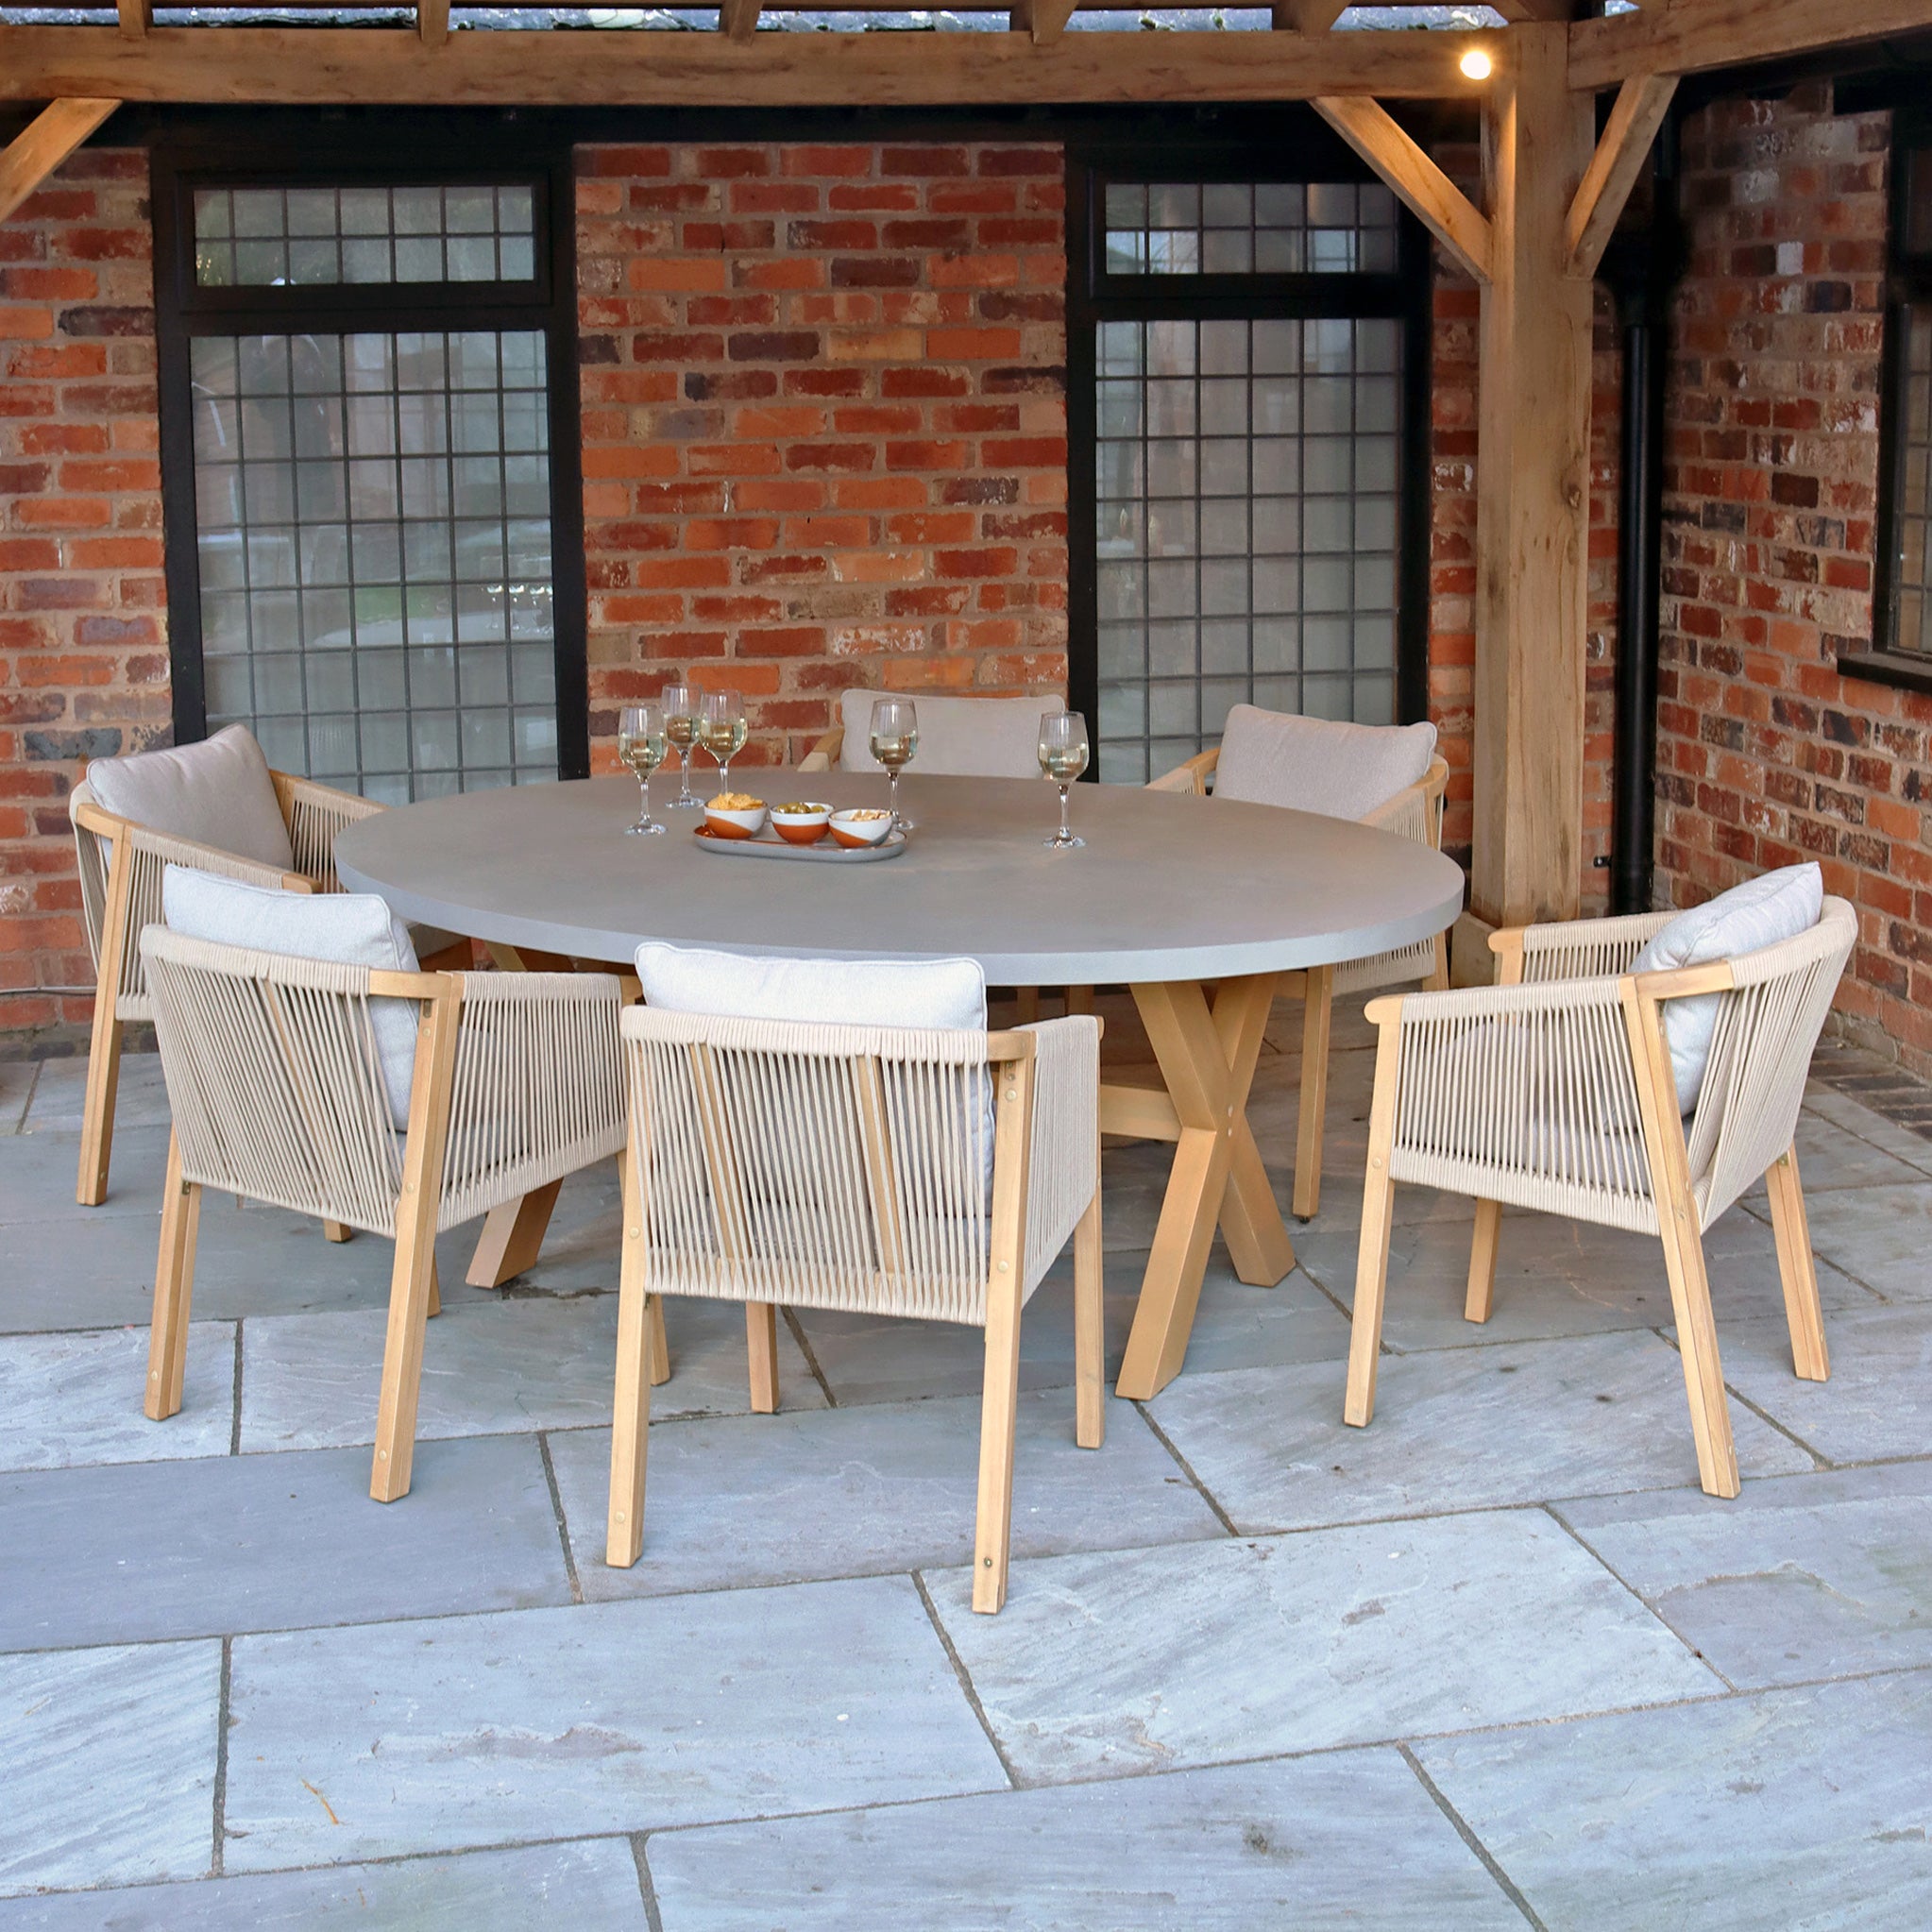 Luna 180x130cm Ellipse Concrete Table With 6 Roma Dining Chairs Roseland